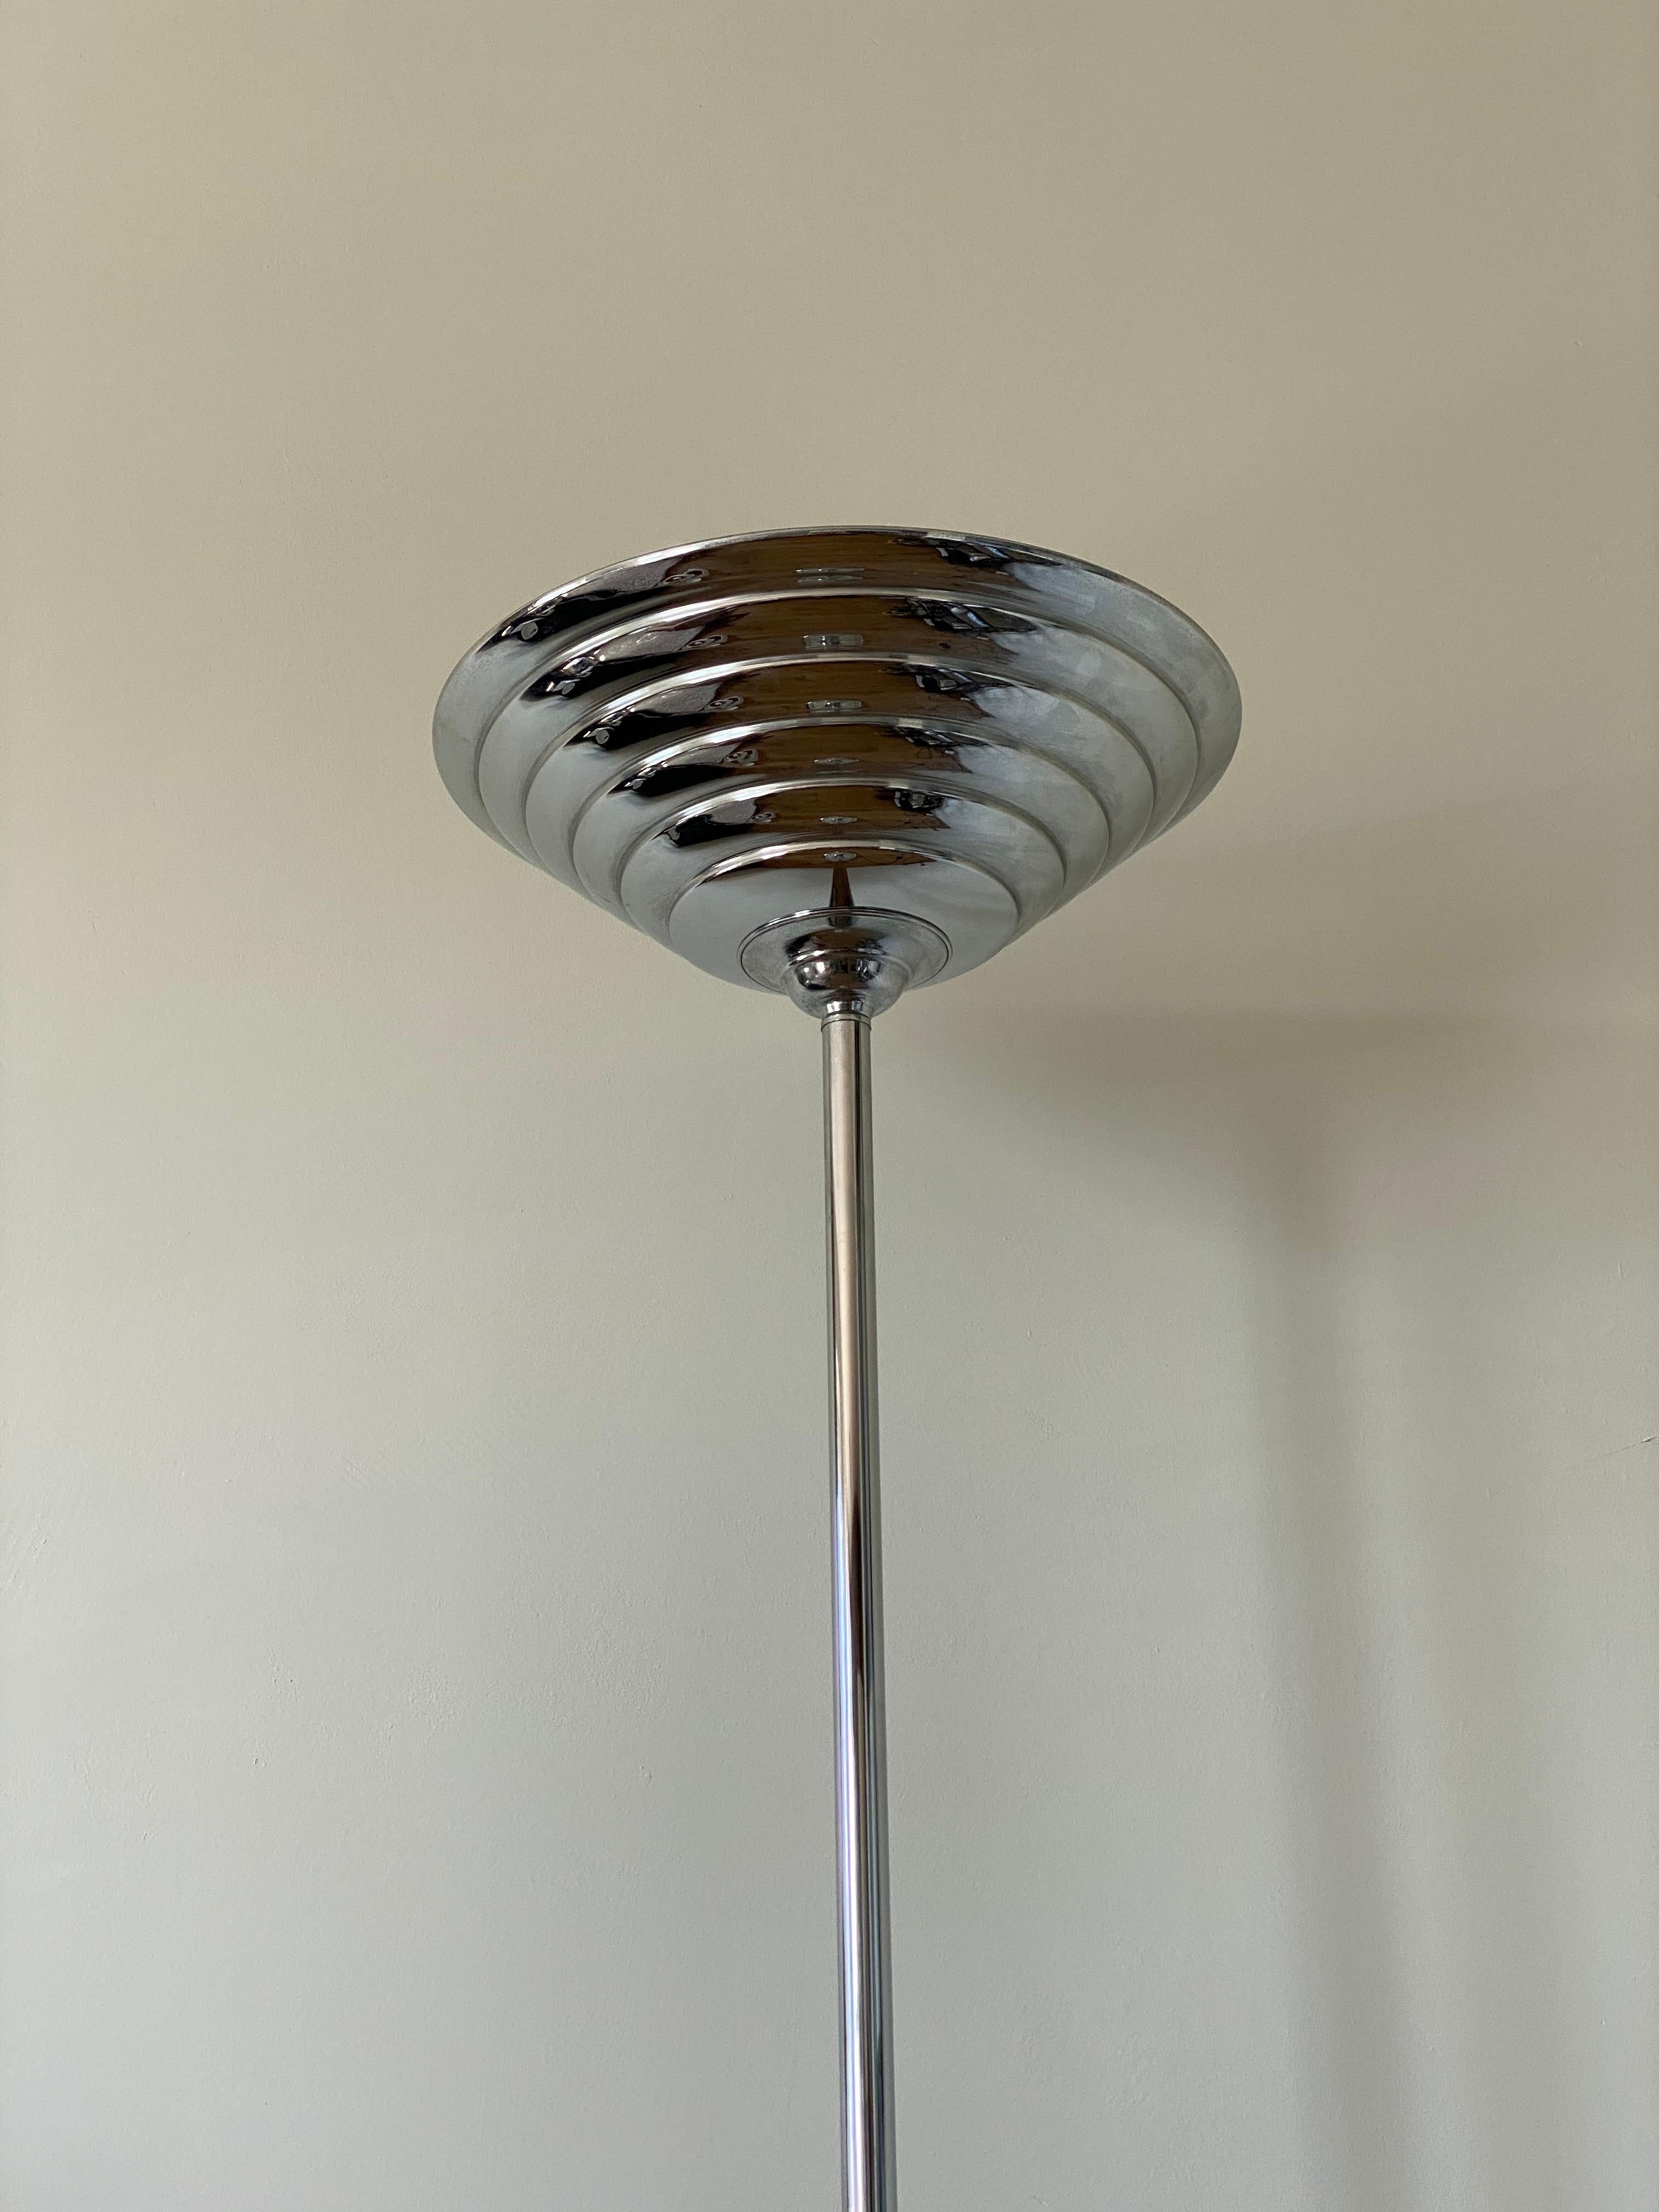 Wonderful European Chromed uplighter, floor lamp in Art Deco / Machine Age style. The lamp which was manufactured circa 1980s remains in a very nice condition.